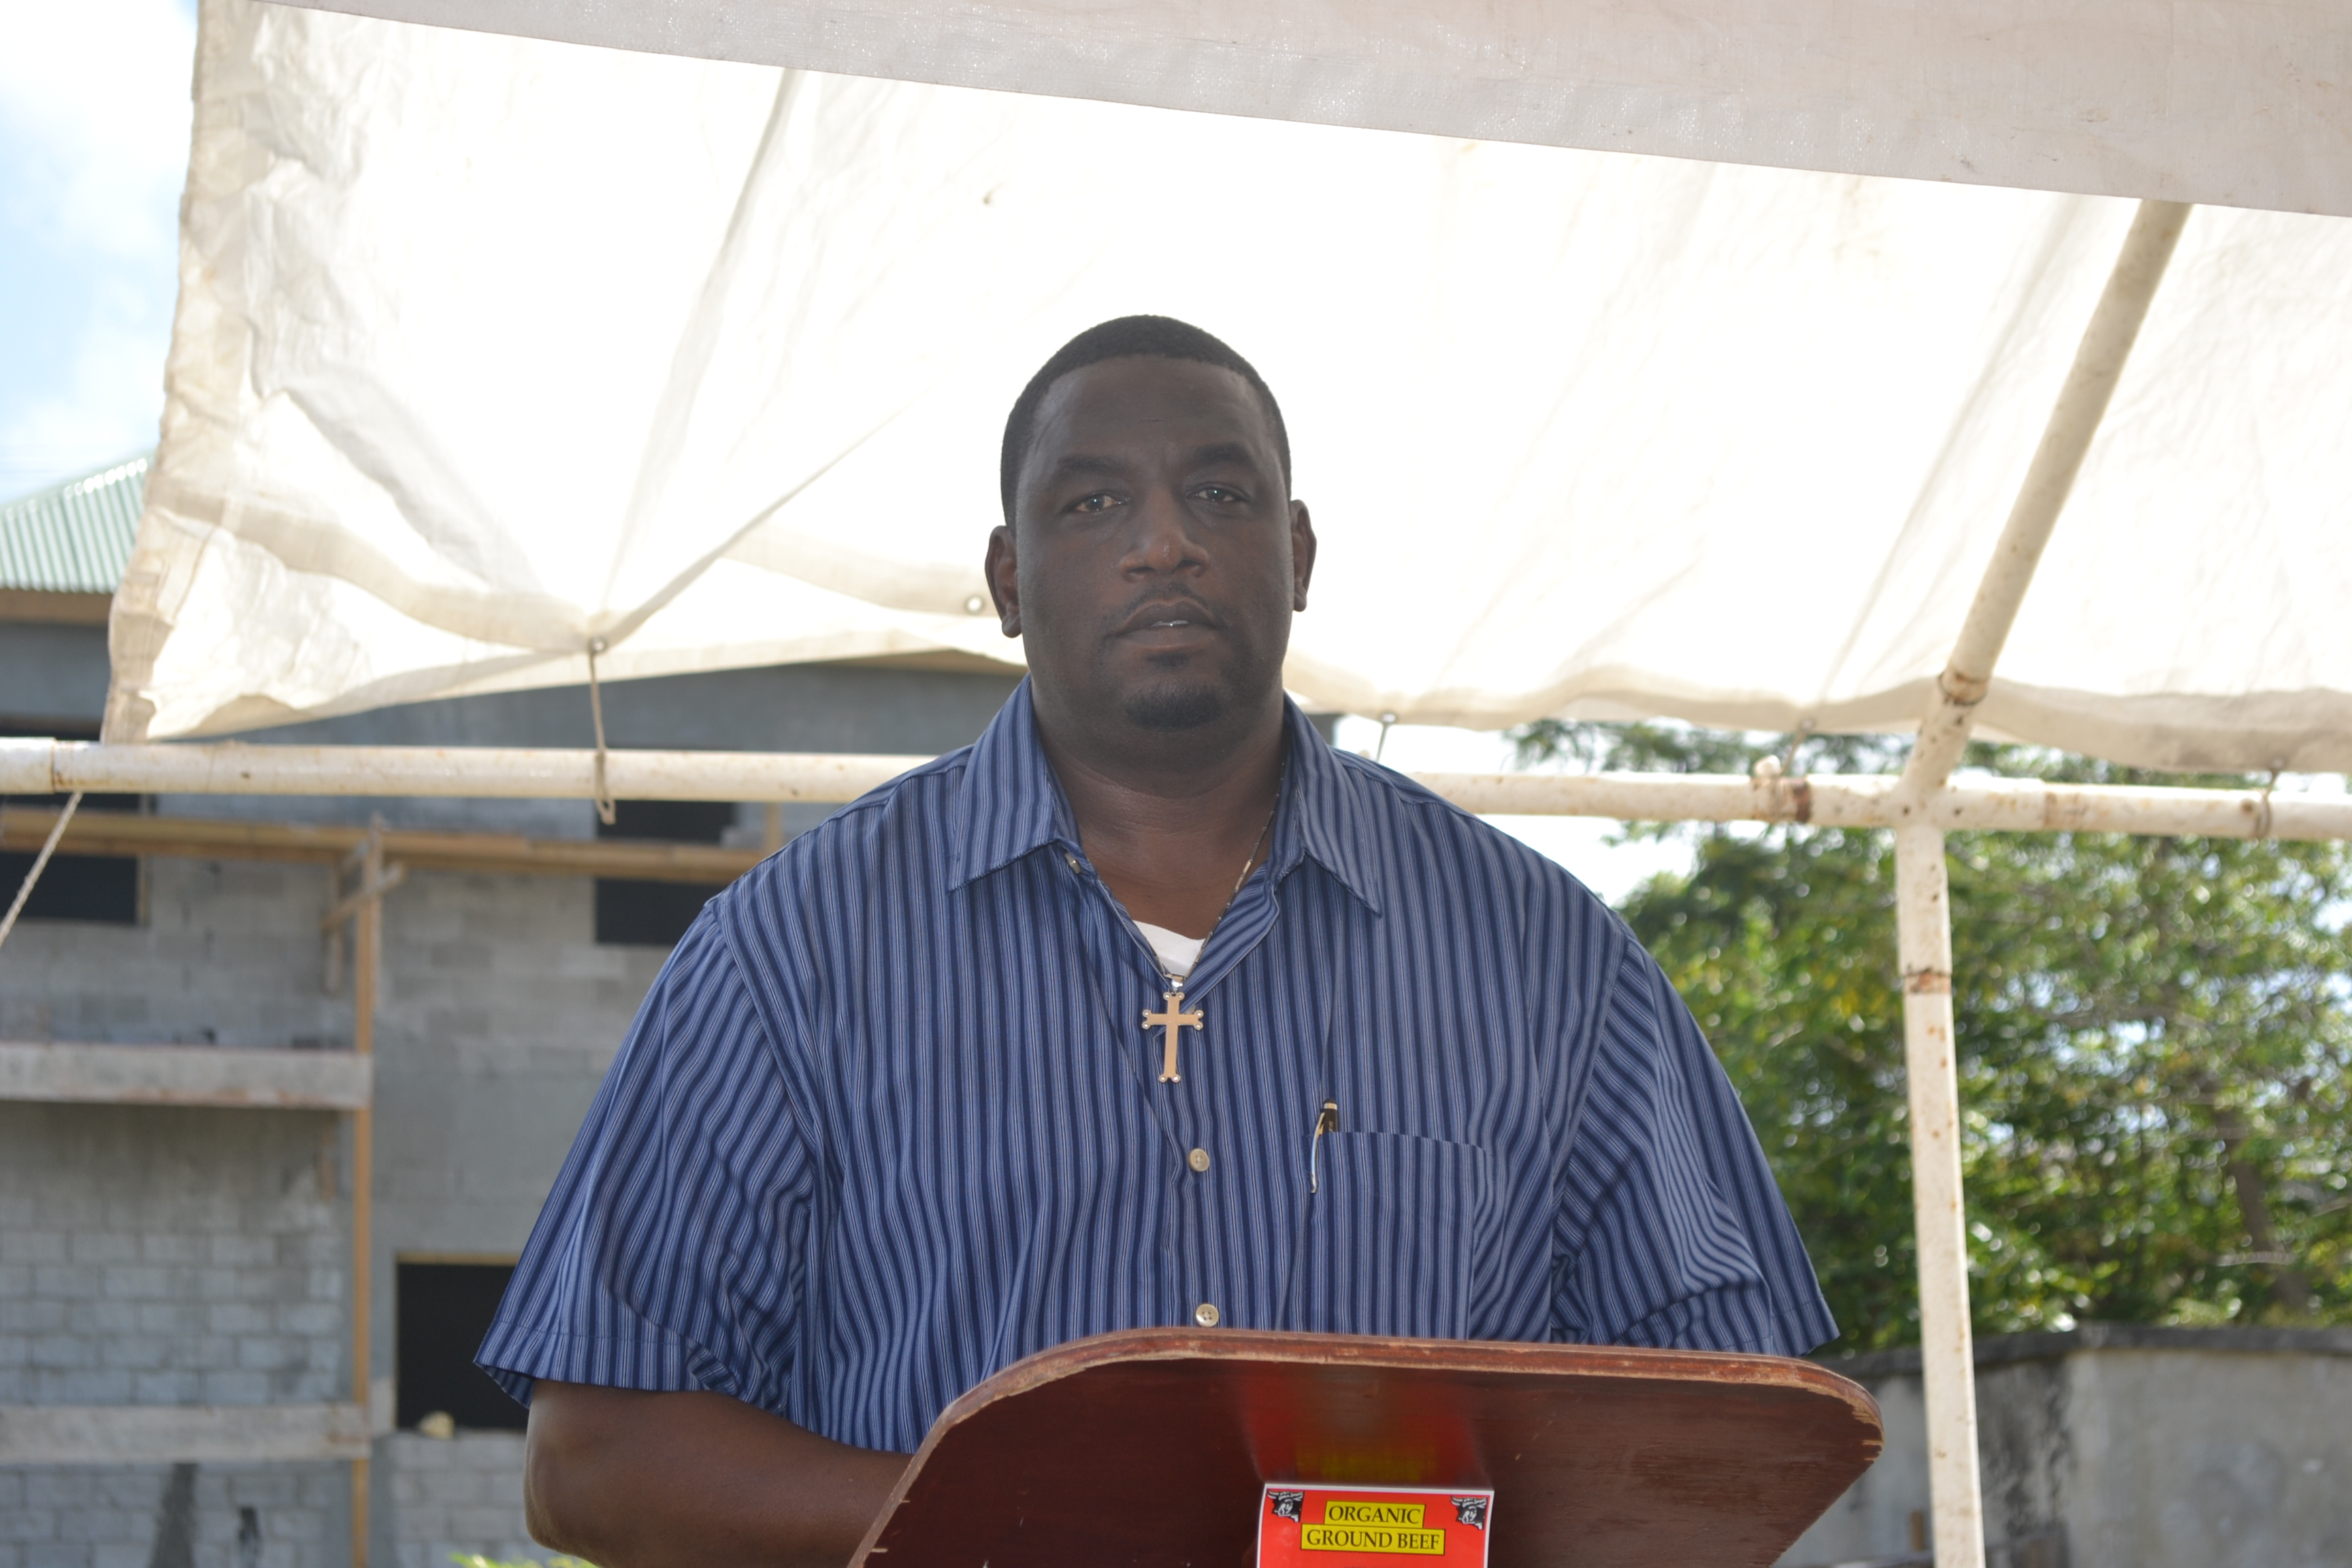 Manager of the Abattoir Mr. Garfield Griffin making remarks at the Ground Breaking Ceremony for the extension of the Abattoir Division on the Abattoir Division Grounds on January 26 2016